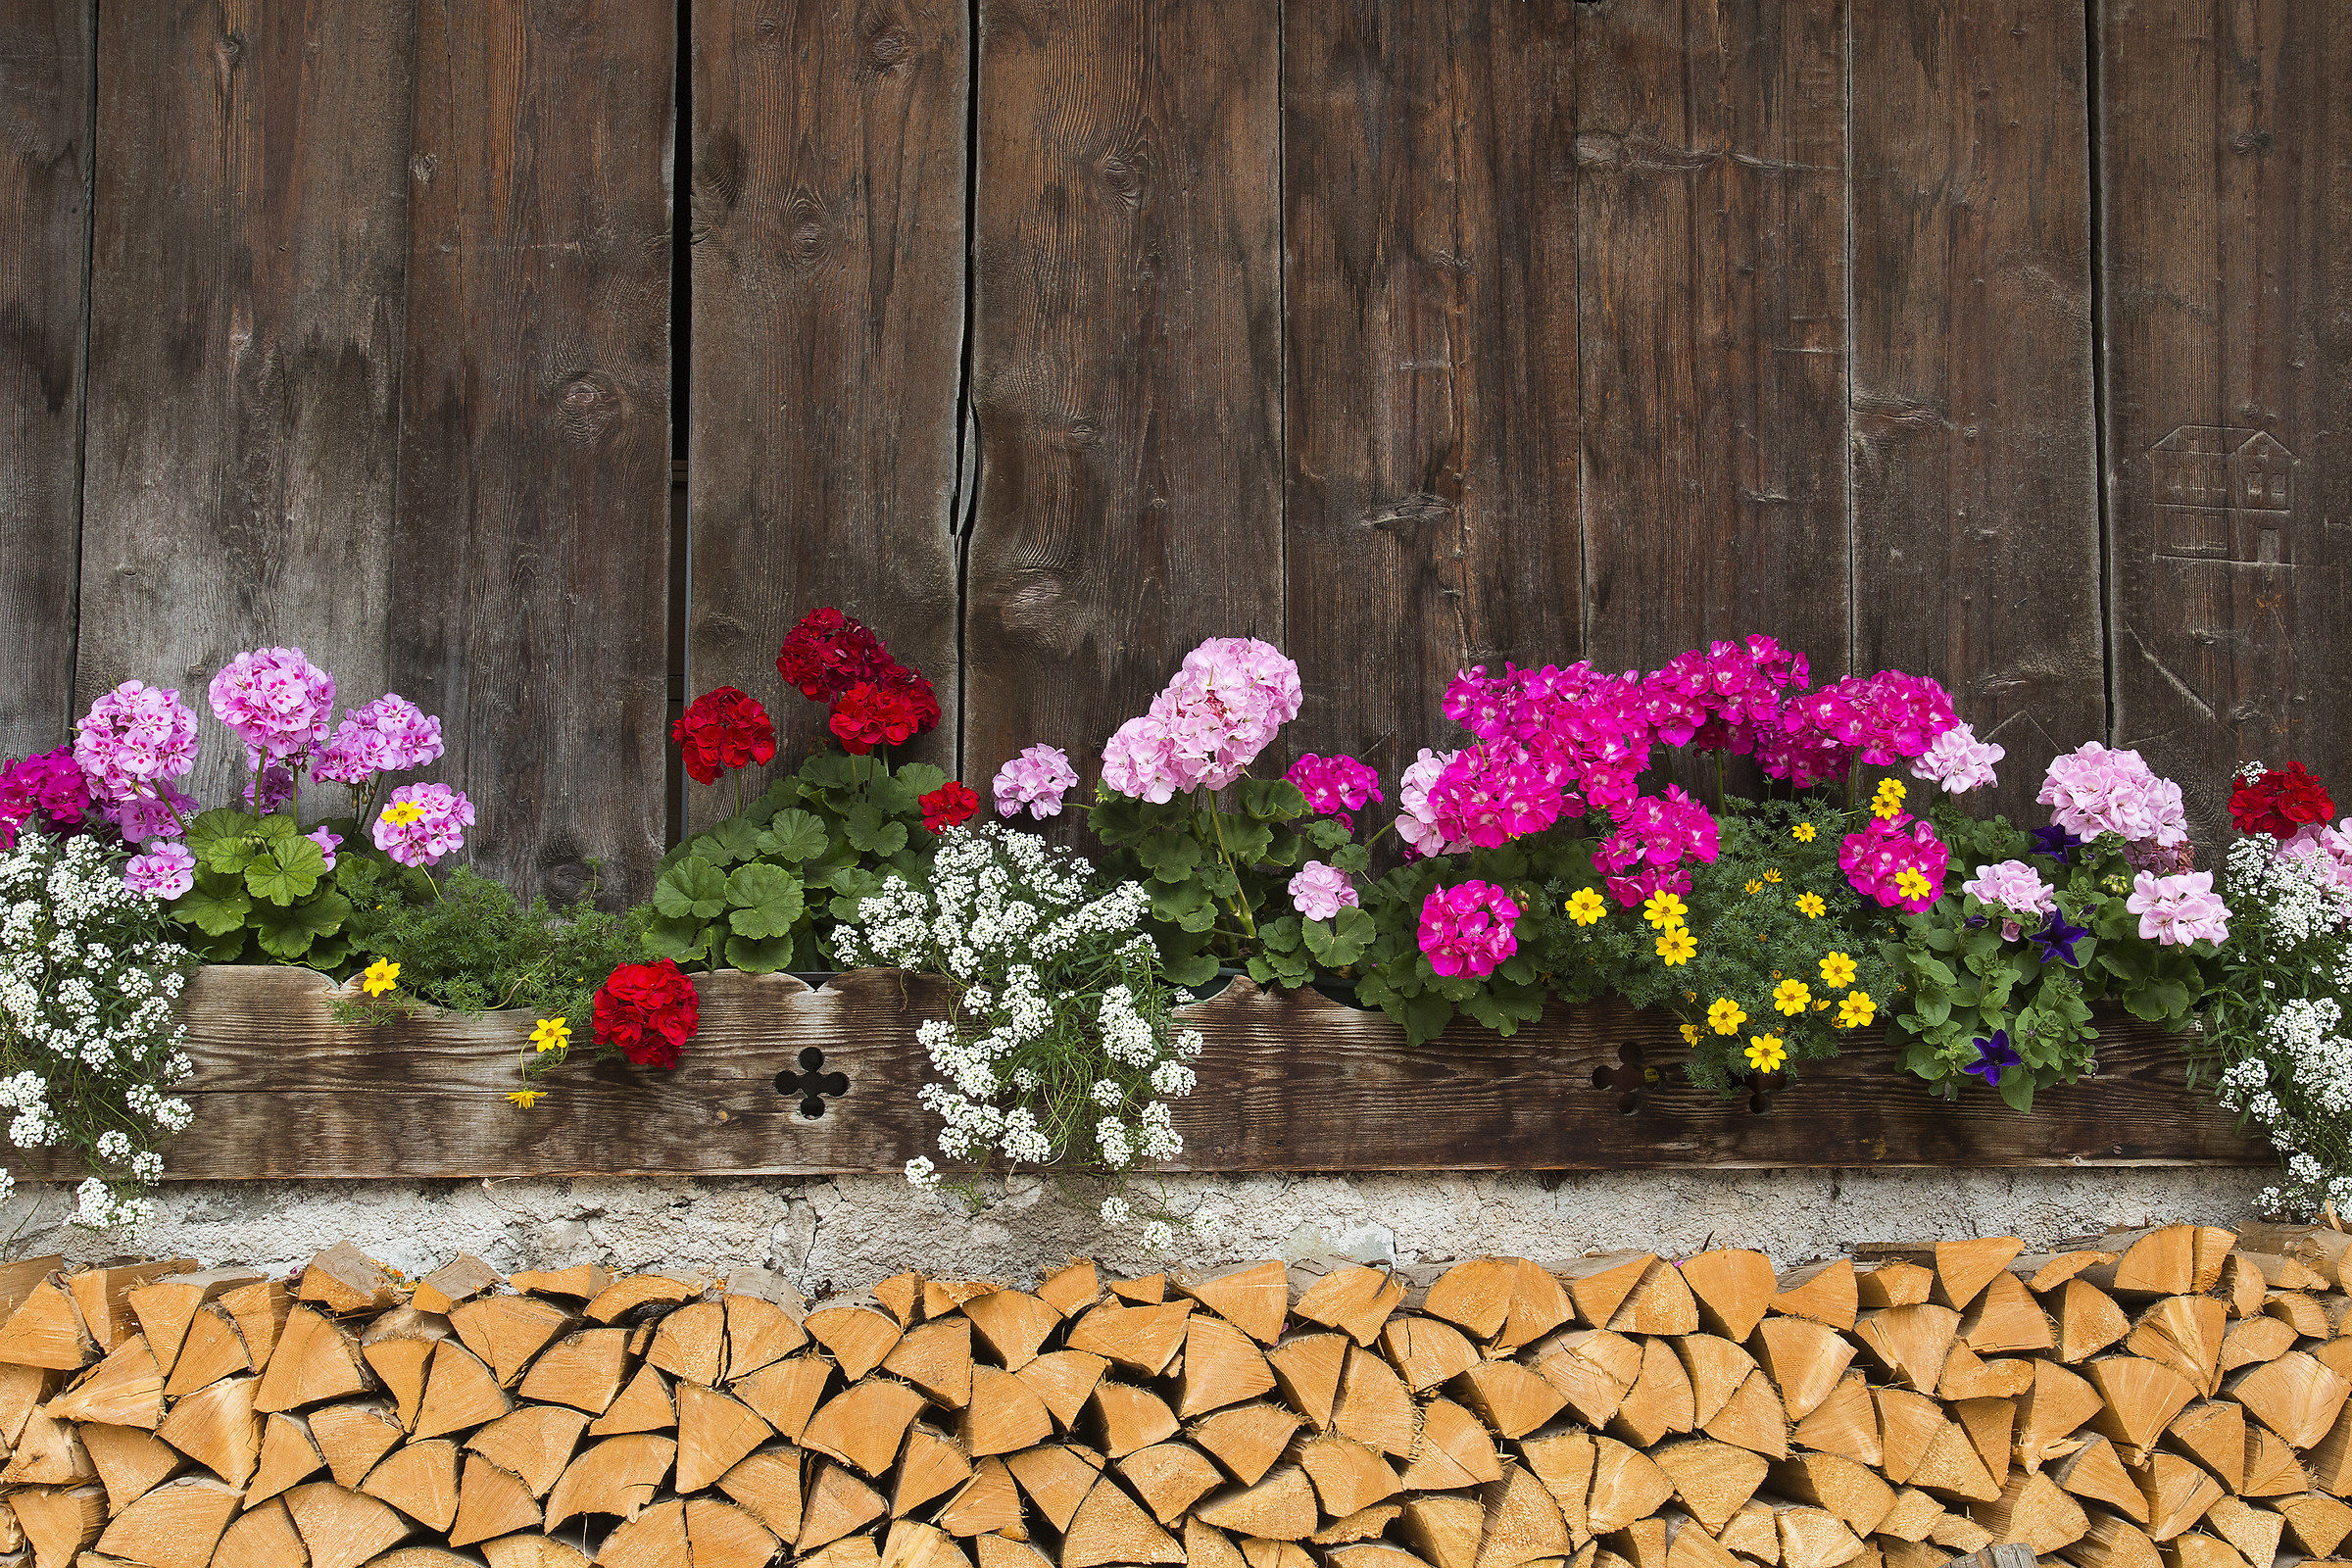 The flowers on the woodshed....